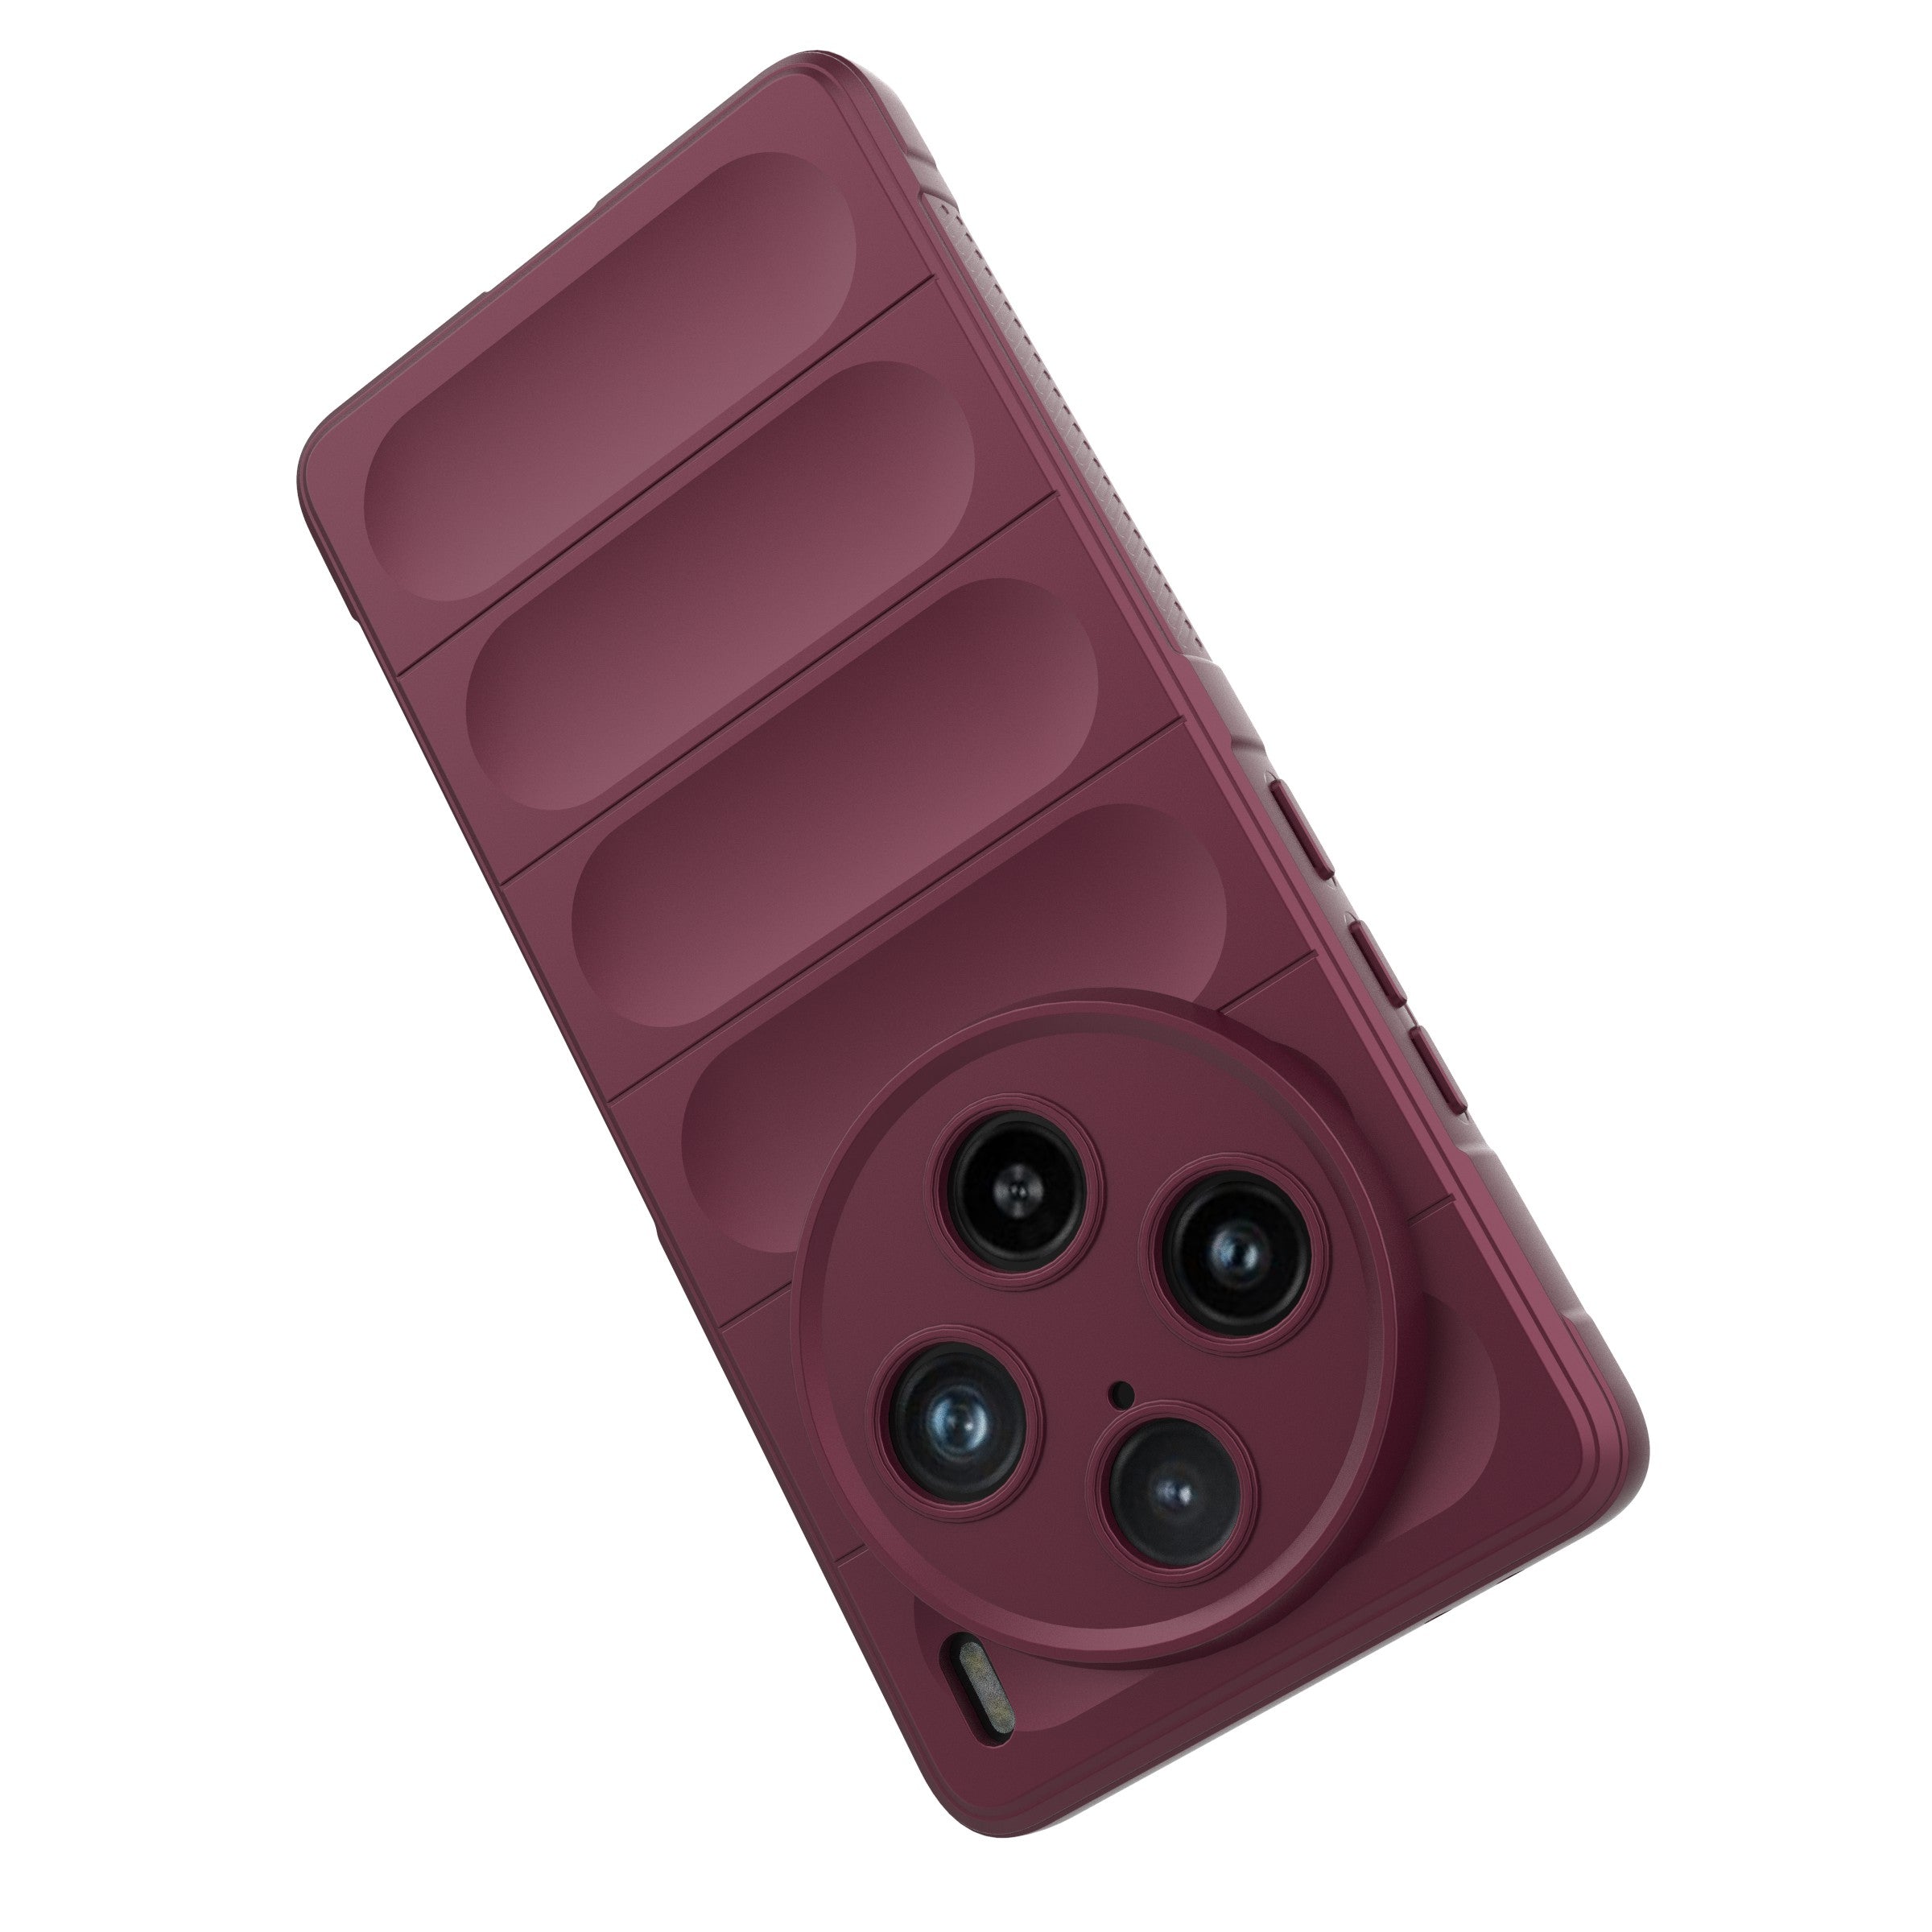 For vivo X100 Pro 5G Case Soft TPU Back Shell Rugged Cell Phone Protector Cover - Wine Red